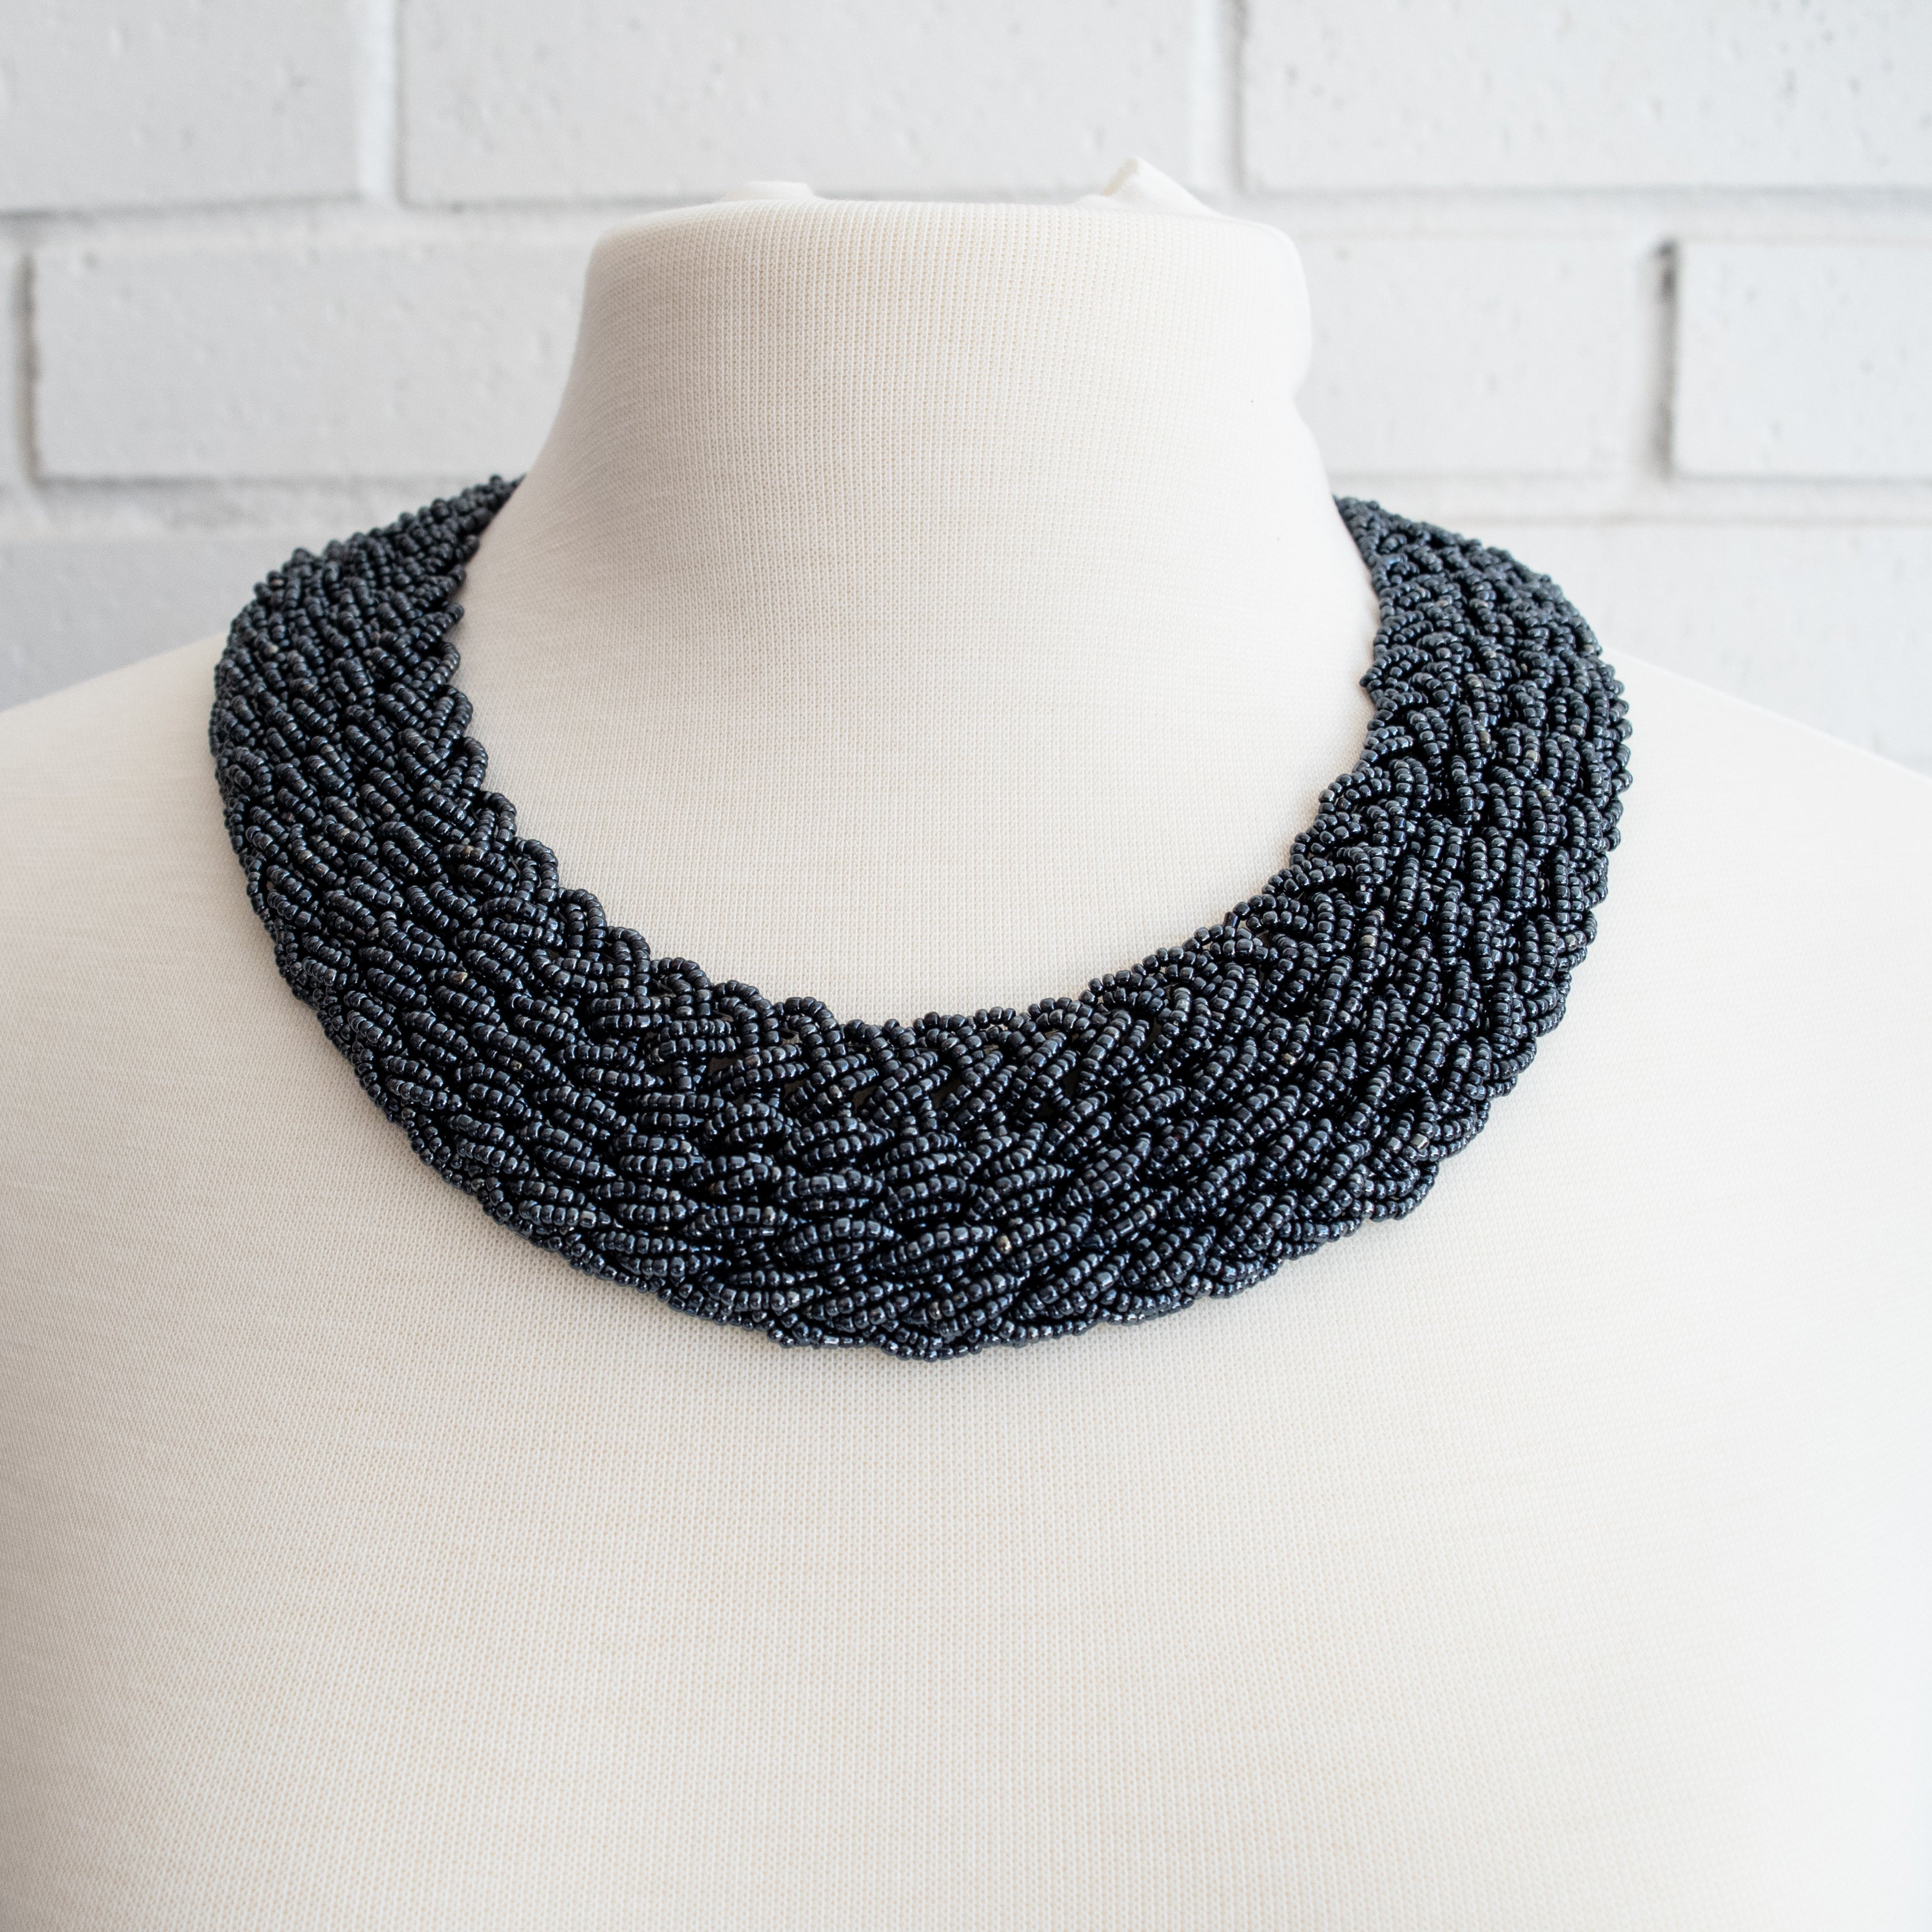 Braided Bead Collar - Kenyan materials and design for a fair trade boutique